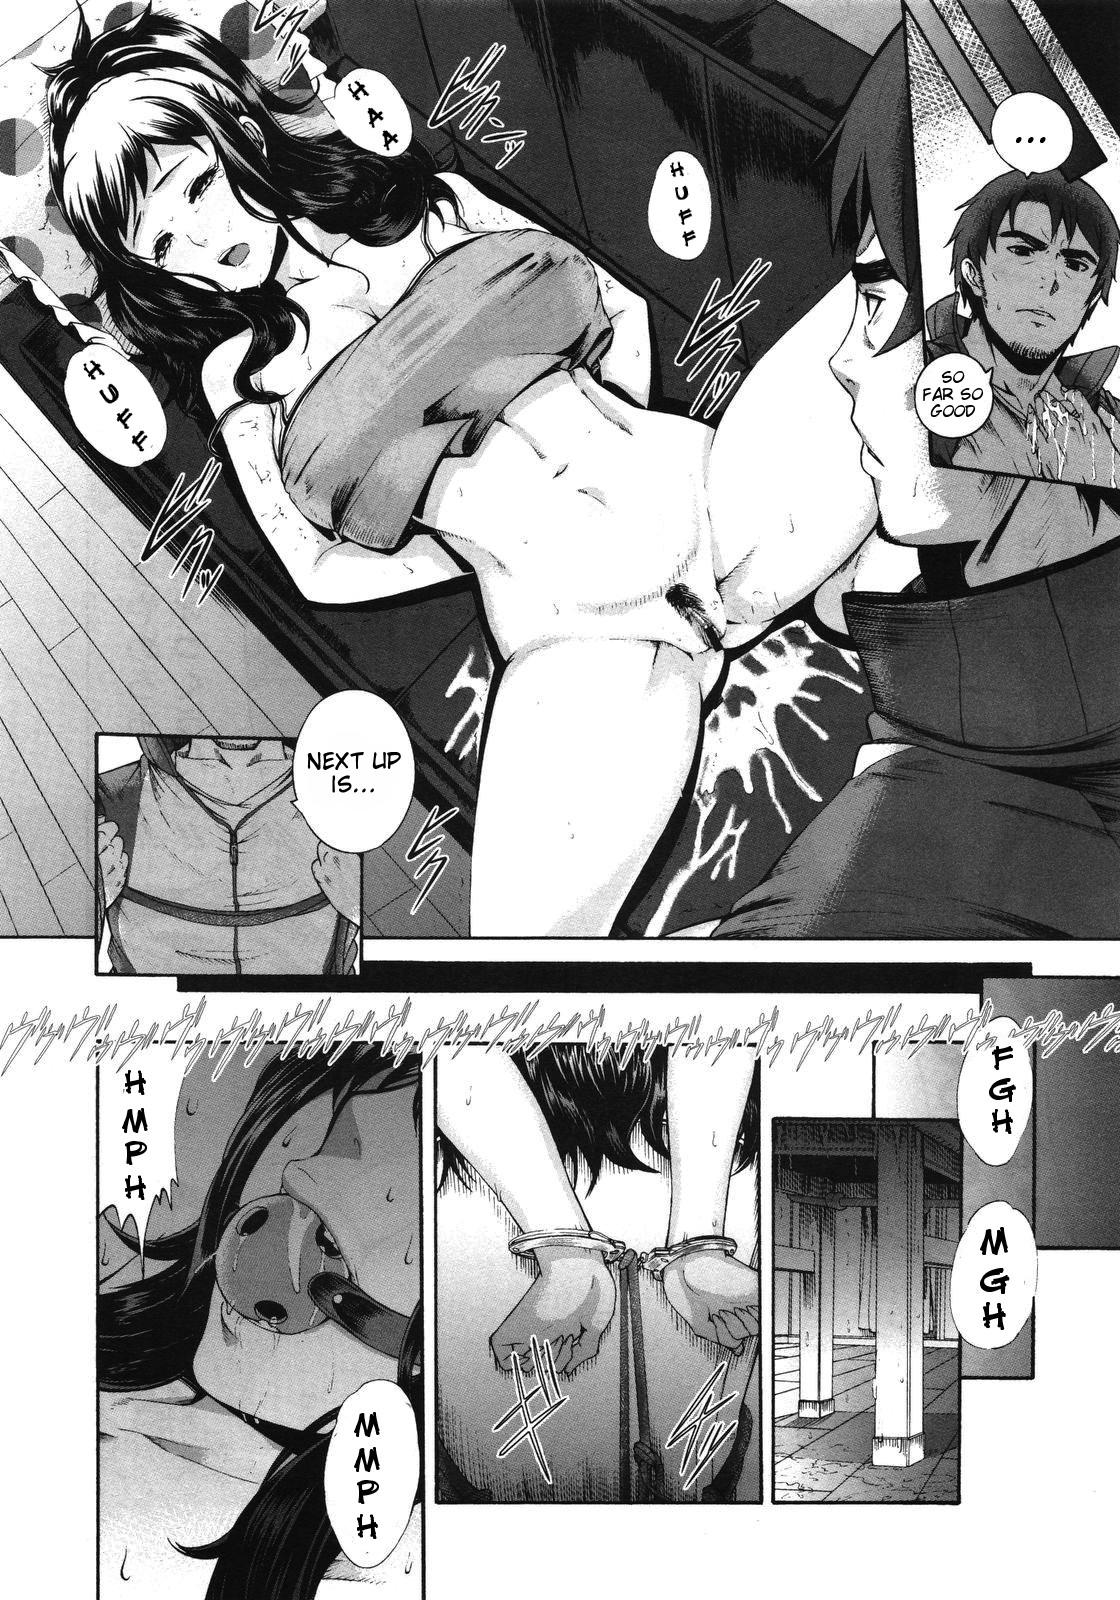 Cuck Konna Ani no Imouto Dakara | Animoca - It's Because I'm a Sister to Such a Brother Gapes Gaping Asshole - Page 10